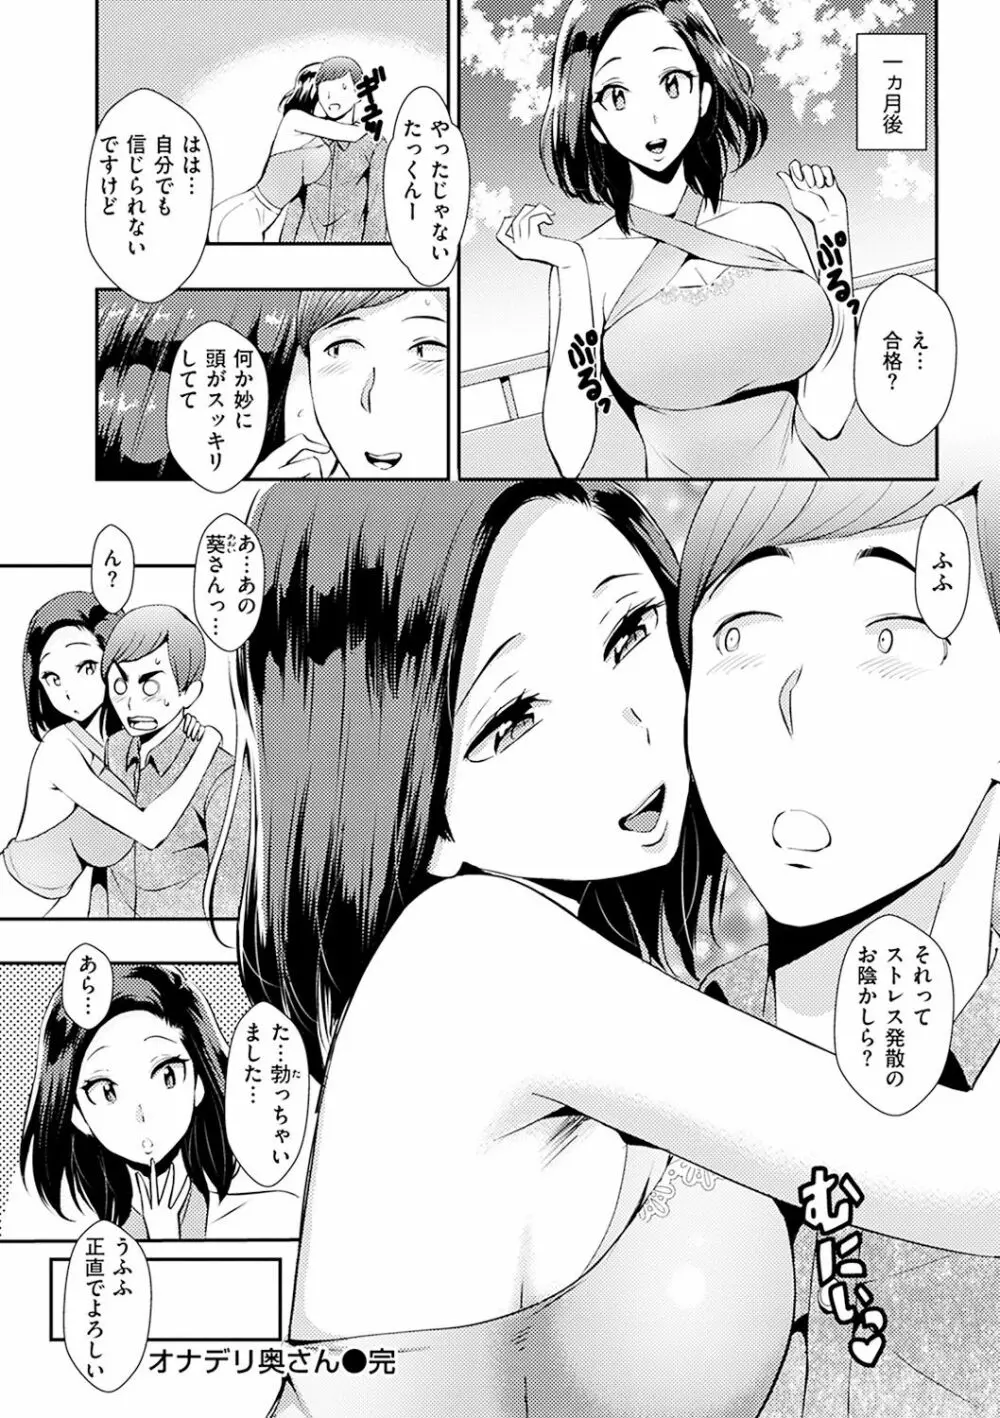 SEX LECTURE 144ページ